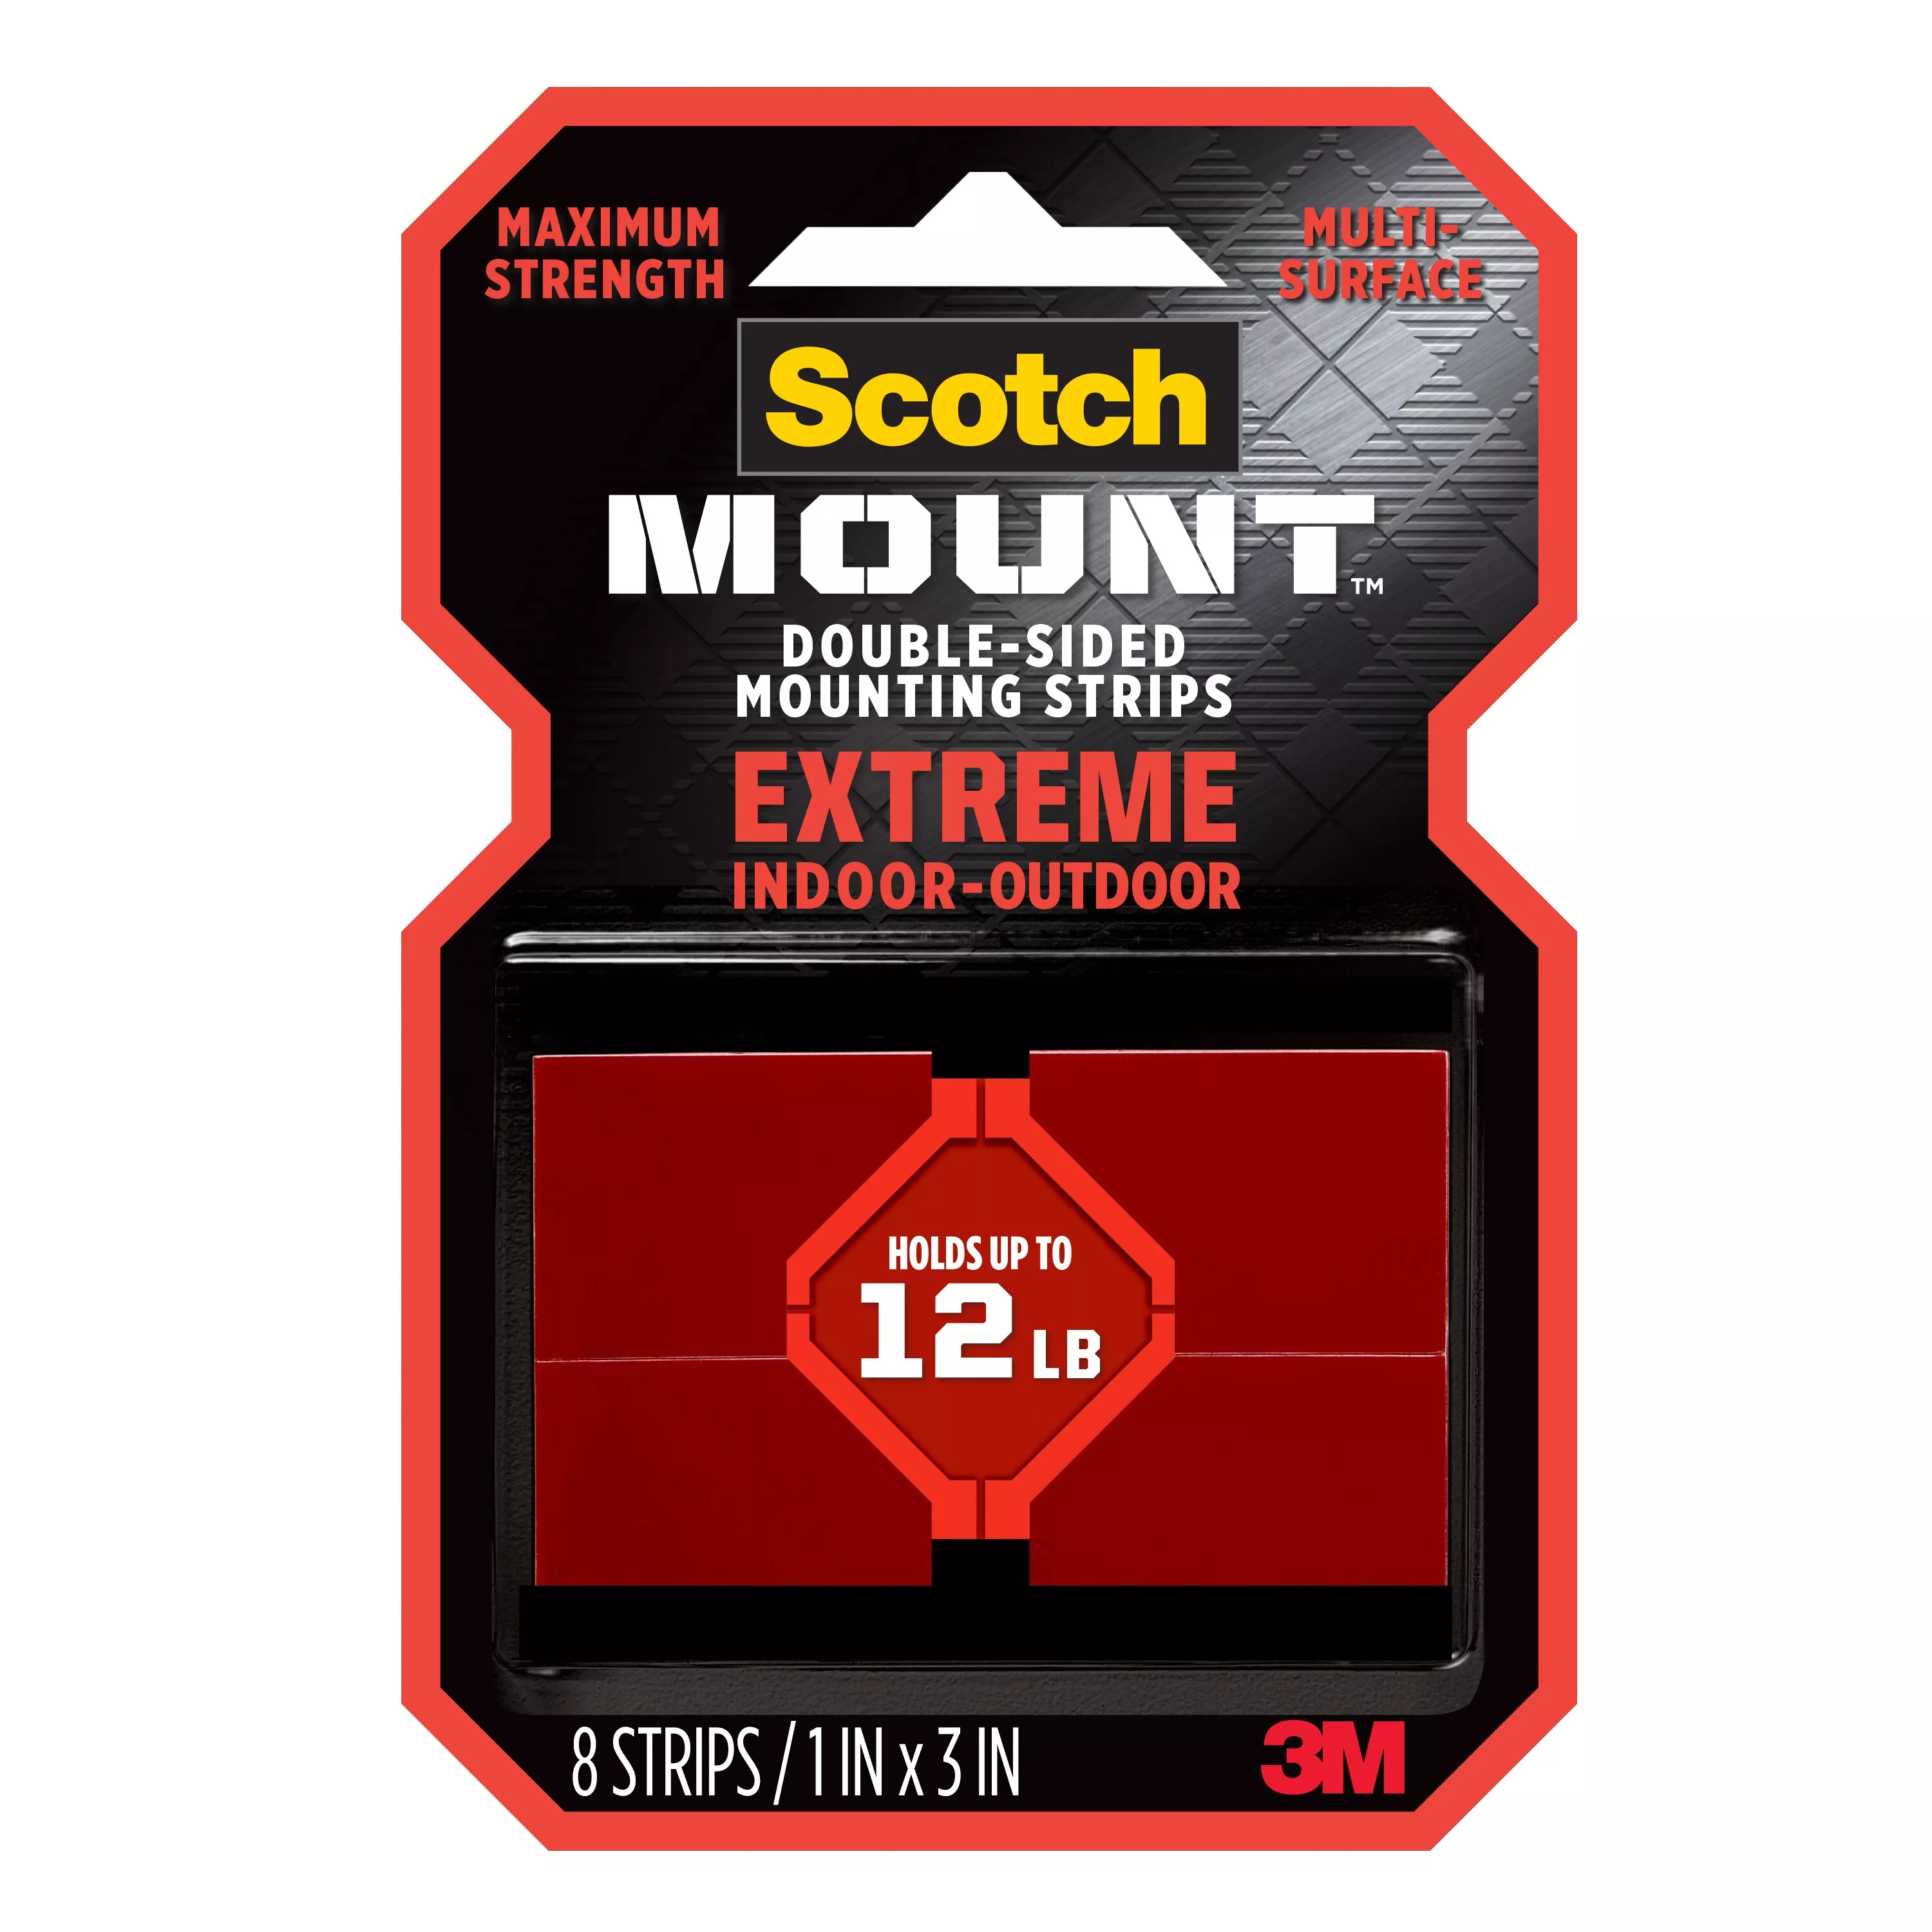 SKU 7100216166 | Scotch-Mount™ Extreme Double-Sided Mounting Strips 414H-ST